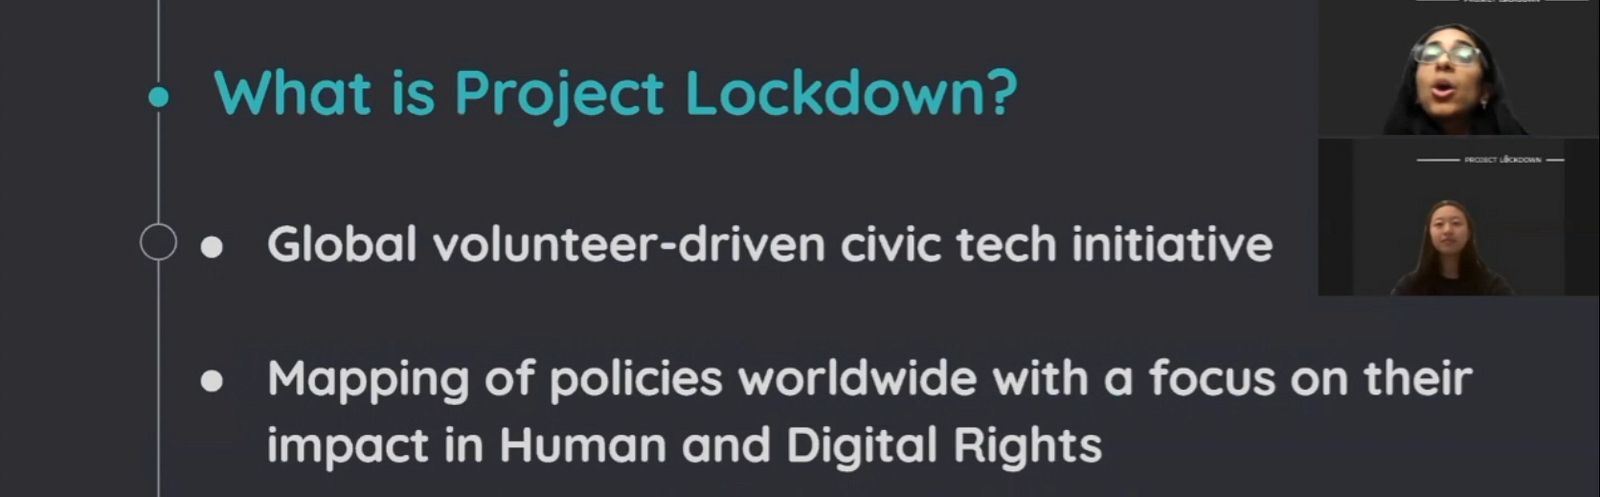 Image text: What is Project Lockdown? Global volunteer-driven civic tech initiative. Mapping of policies worldwide with a focus on their impact in Human and Digital Rights.